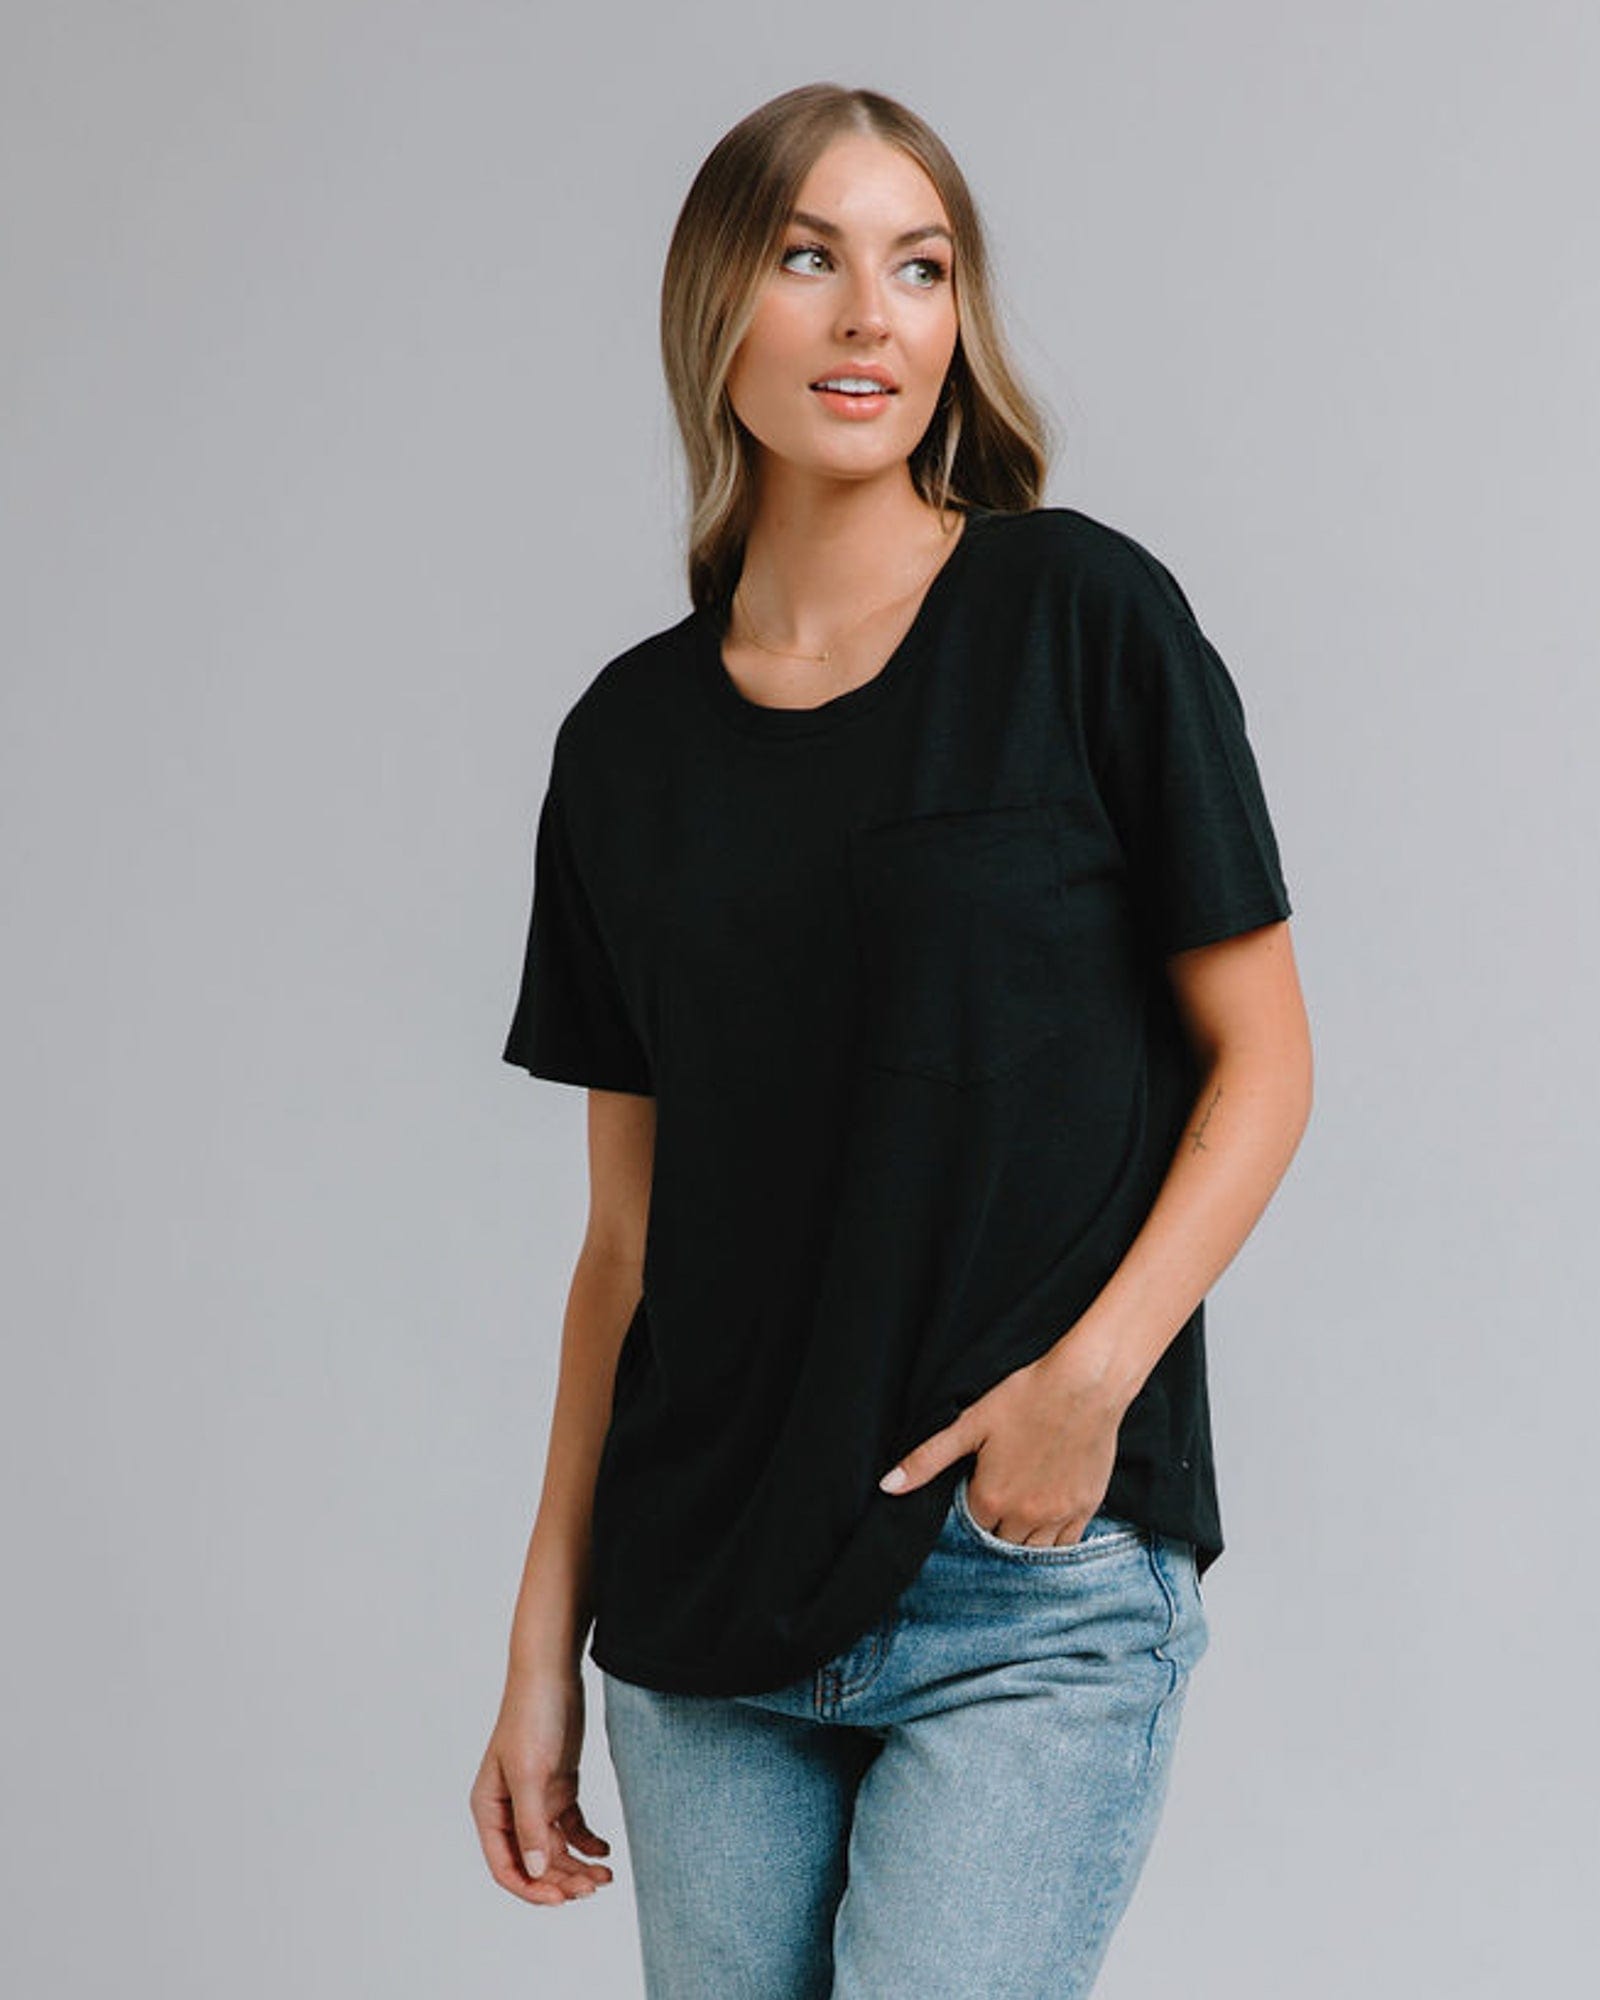 Woman in a short sleeve, oversized, t-shirt